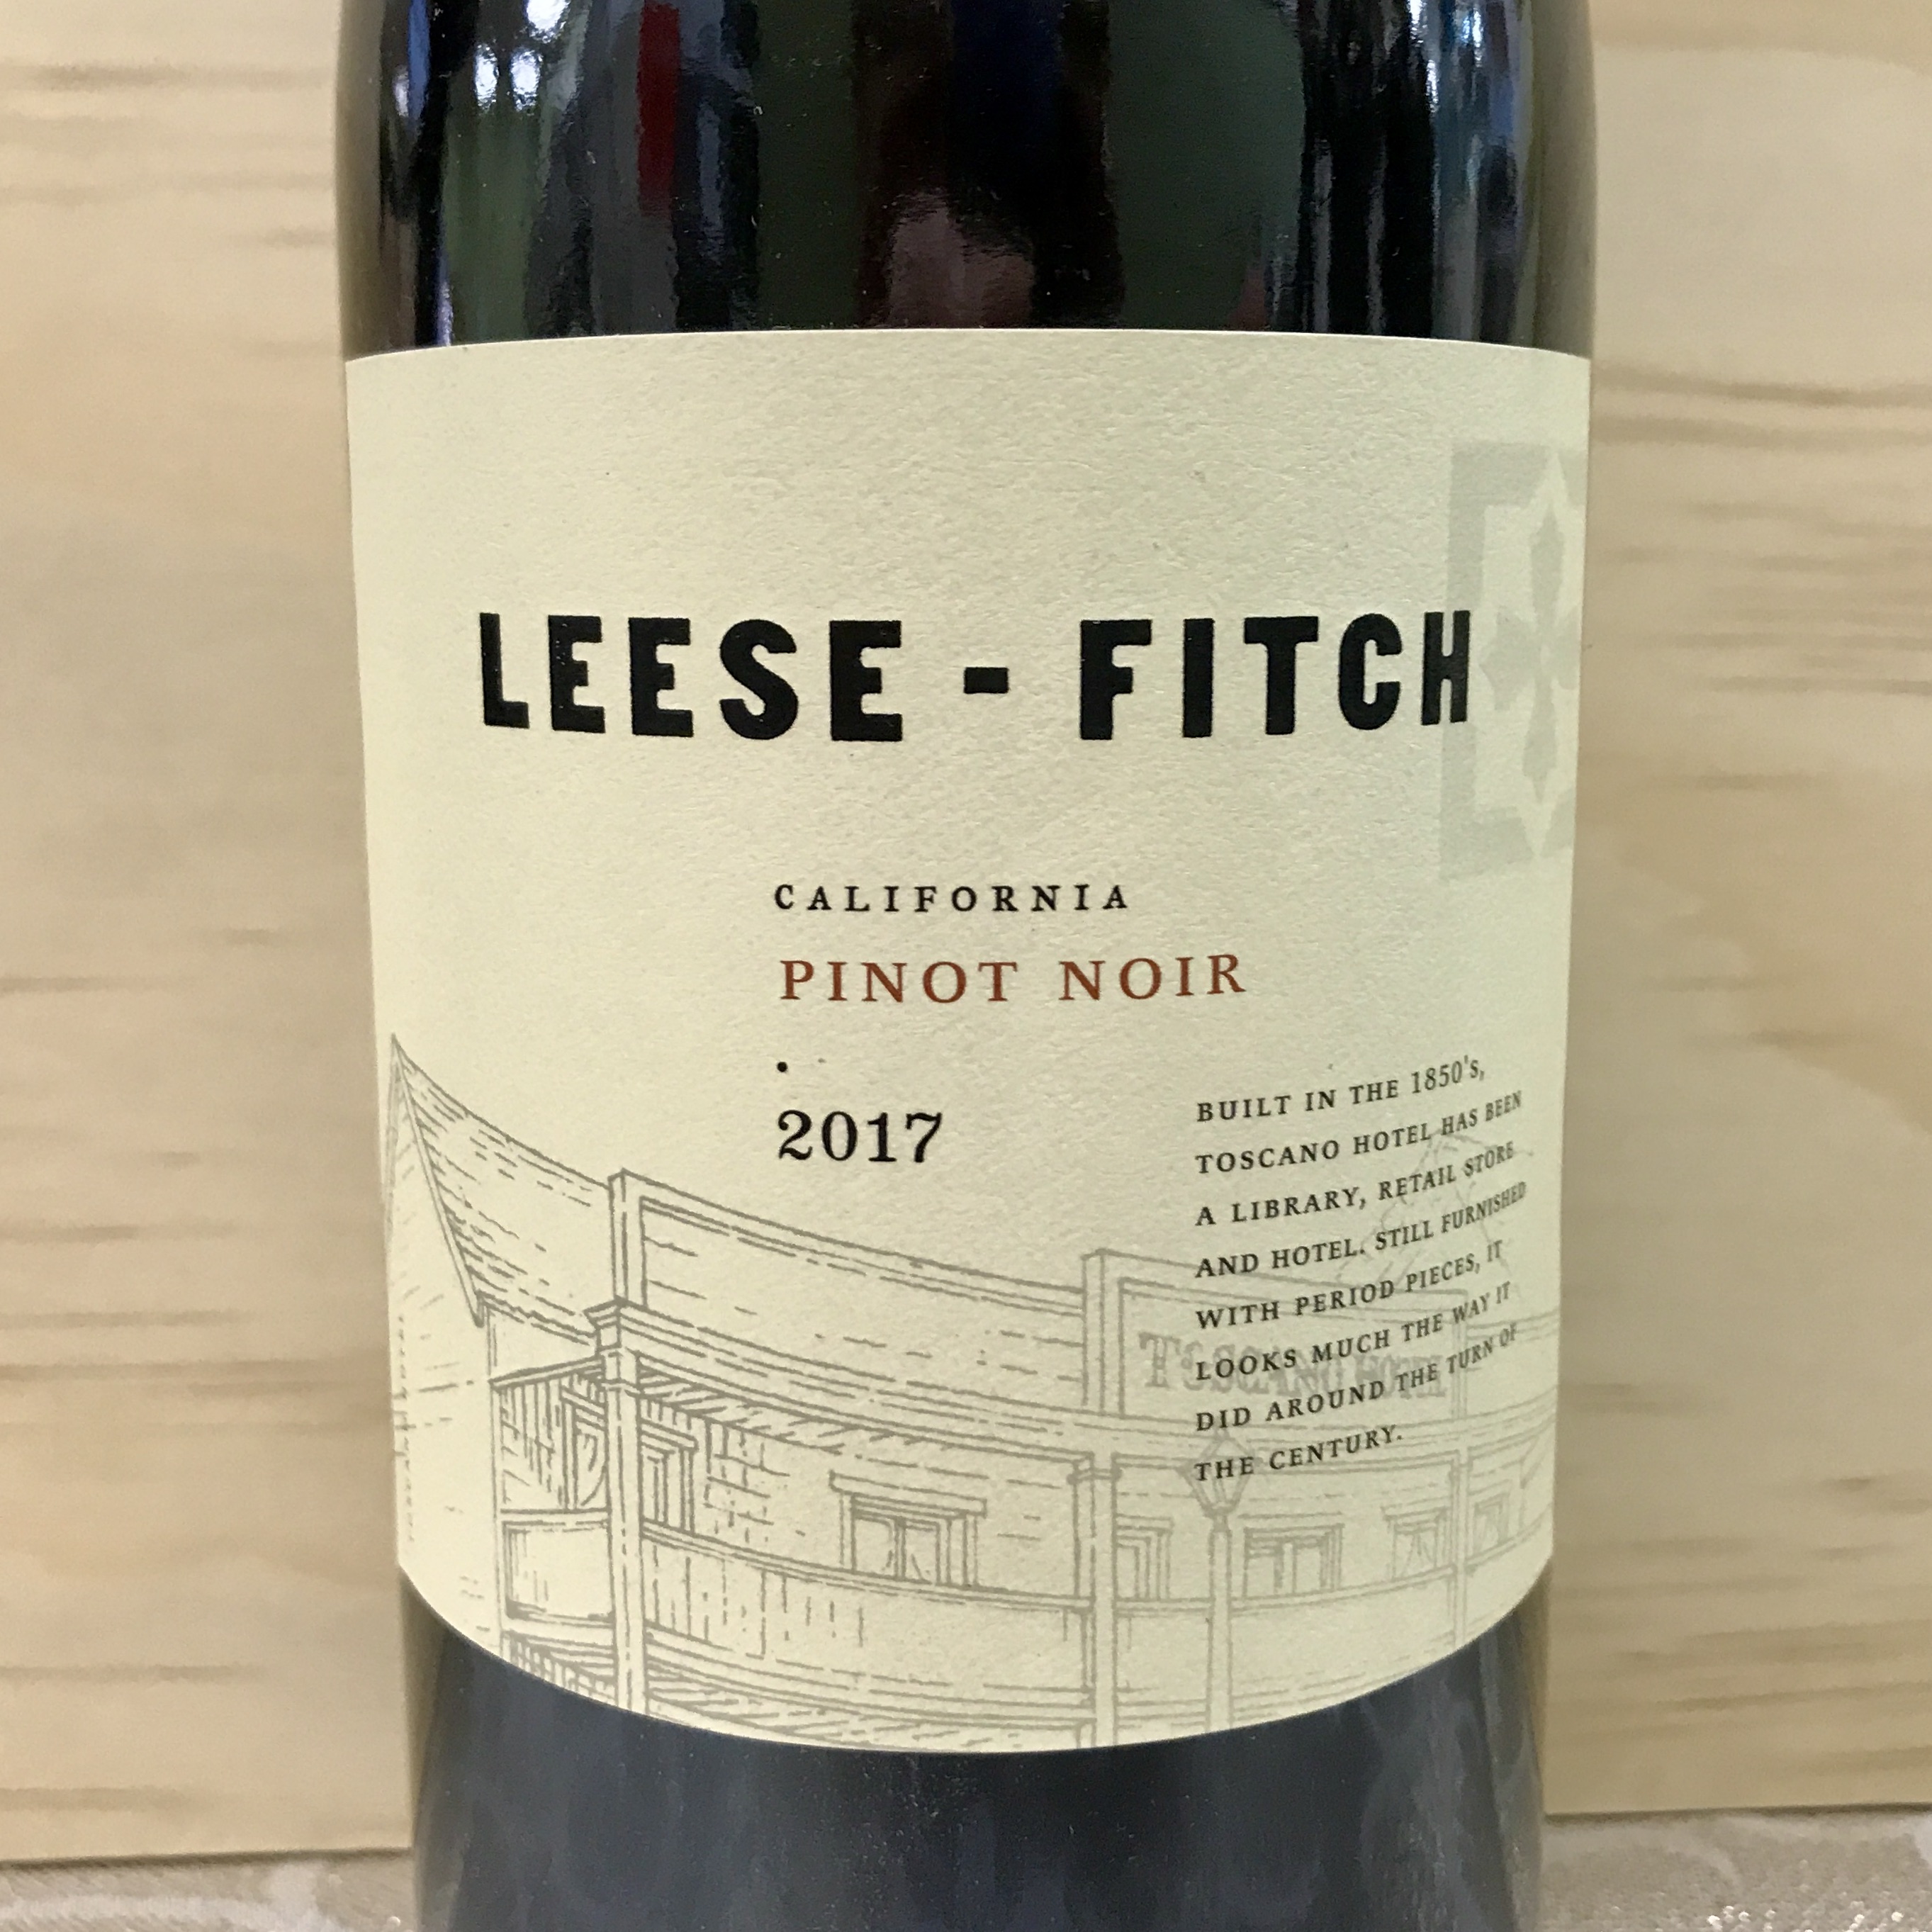 Leese - Fitch Pinot Noir 2017